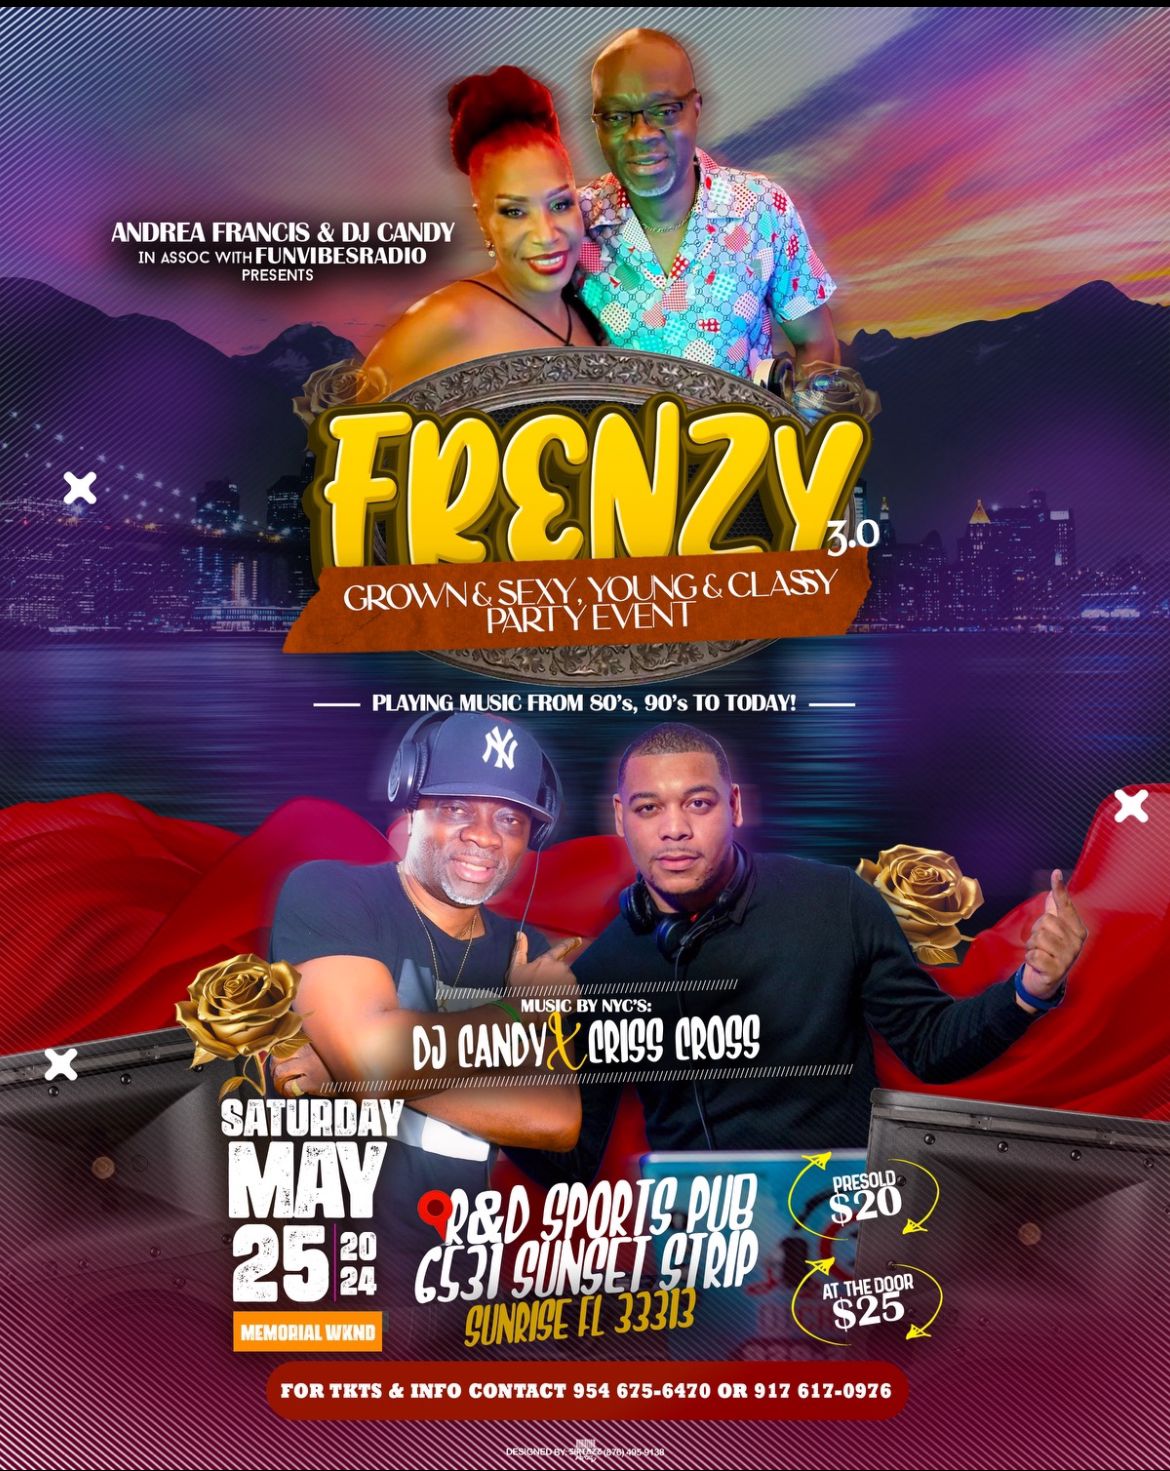 Andrea Francis & Dj Candy In Assoc With Funvibesradio Presents Frenzy 3.0 Grown &sexy.young & Classy Party Event